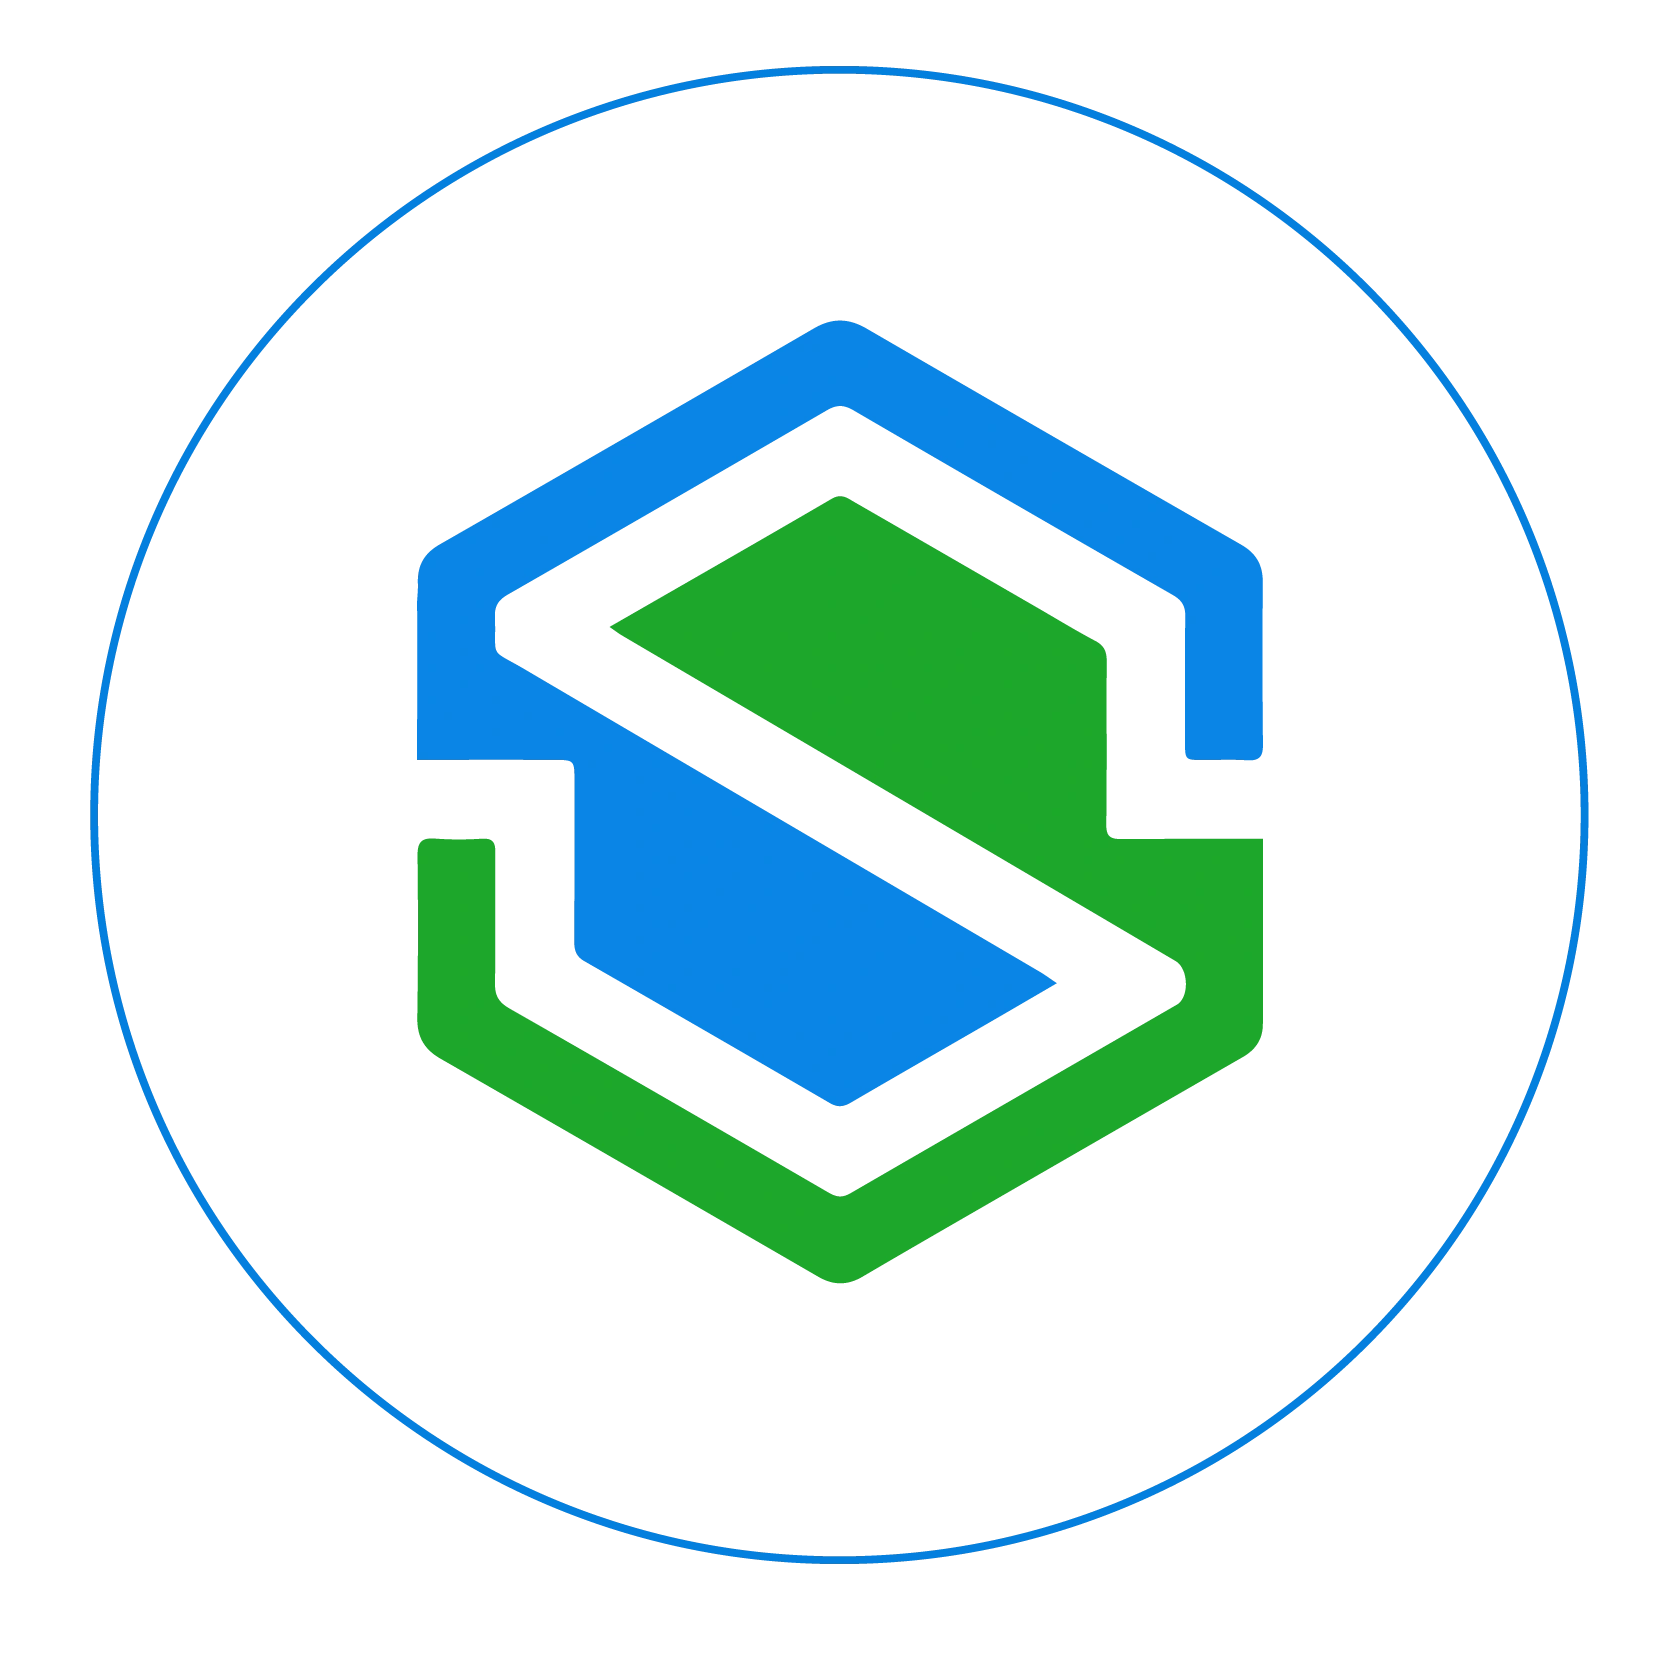 The letter S represents the Softie cleaning services logo in green and blue.